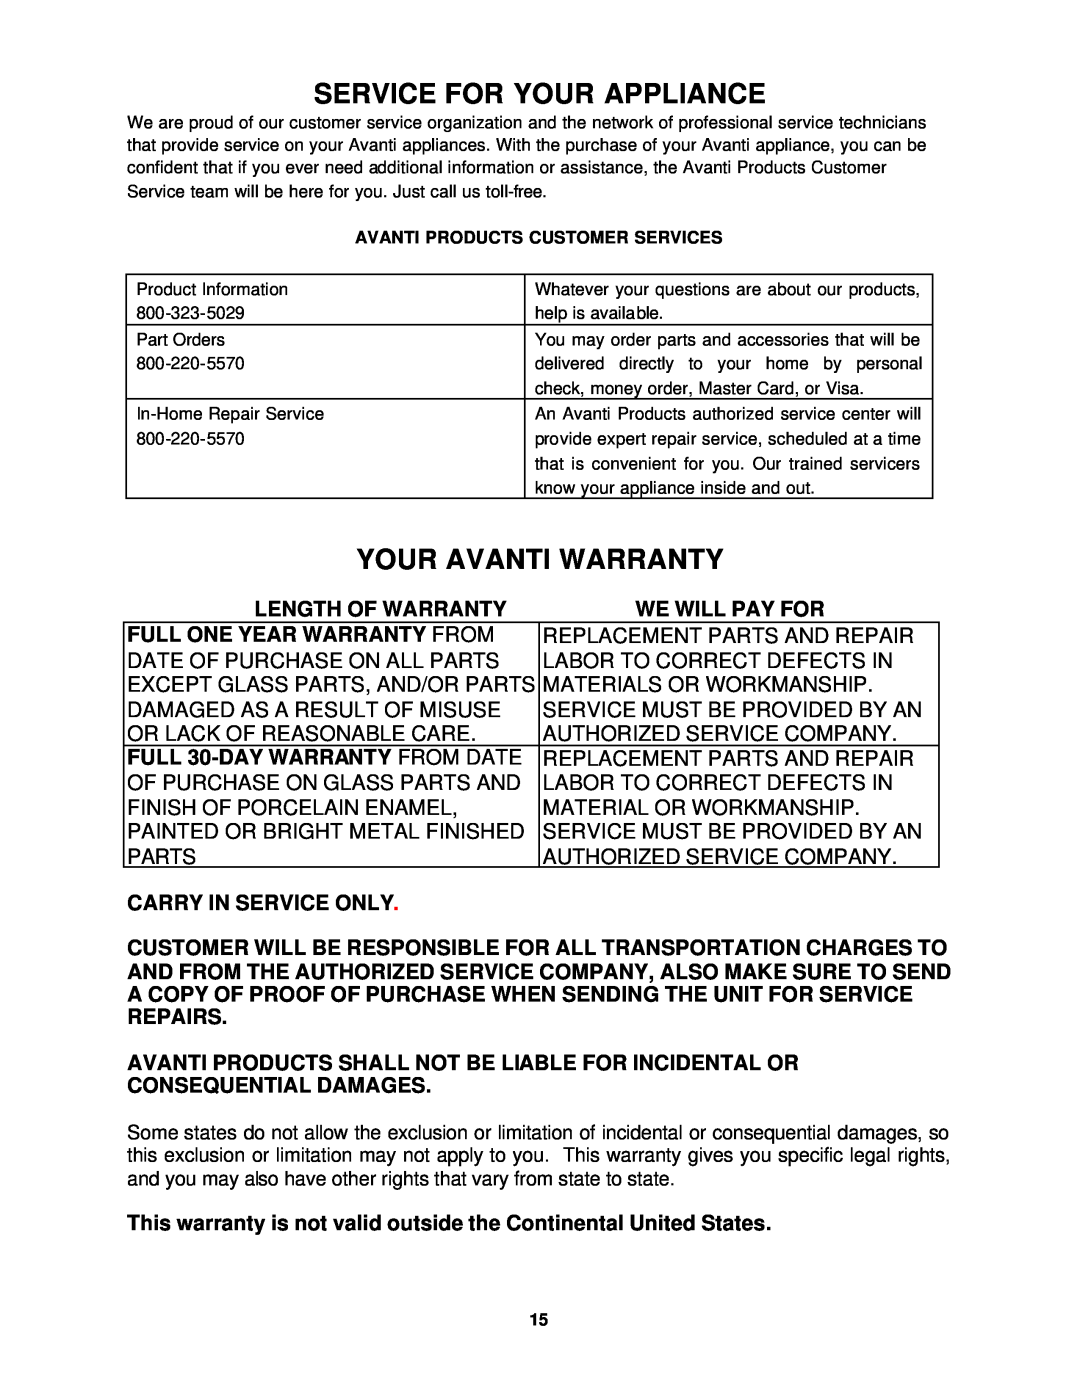 Avanti OCR43SS instruction manual Service For Your Appliance, Your Avanti Warranty, Length Of Warranty, We Will Pay For 